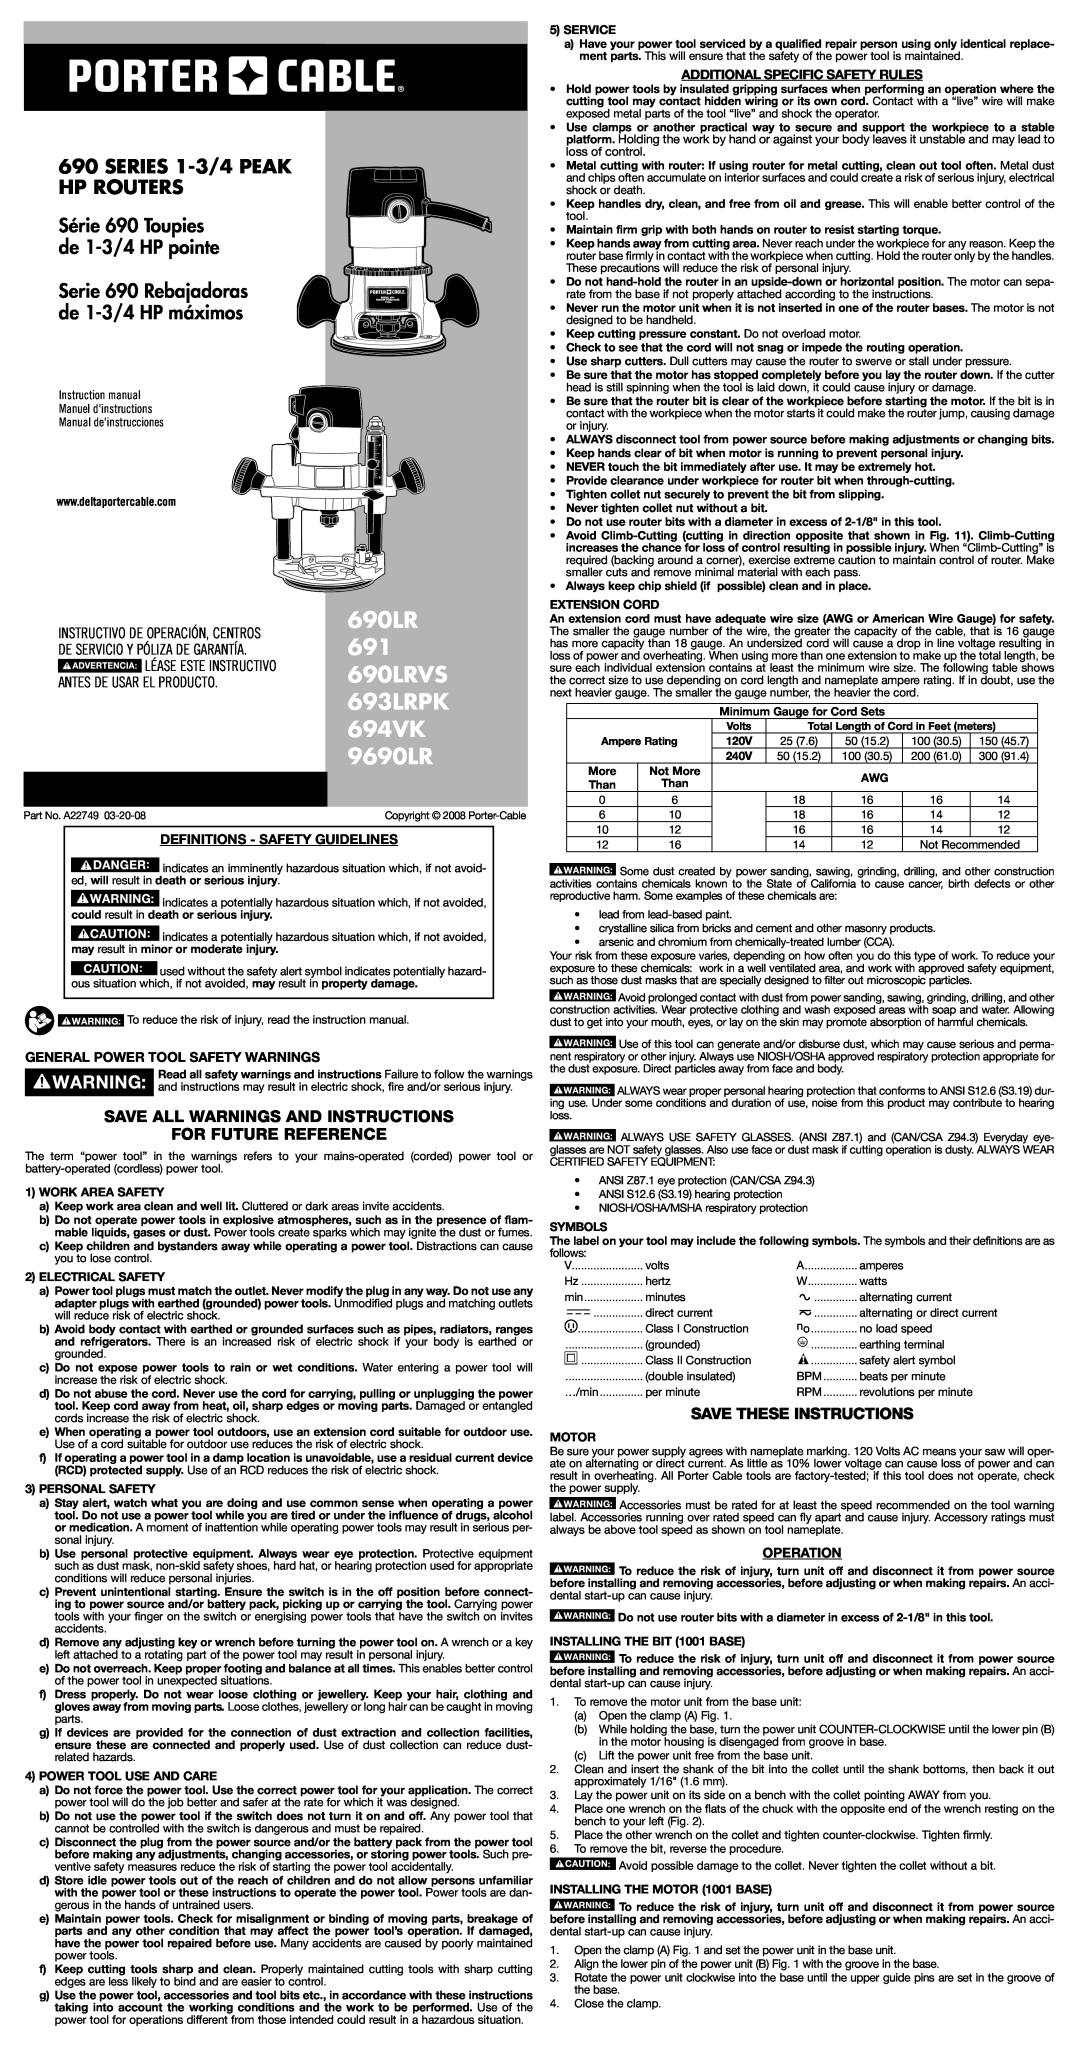 Porter-Cable 9690LR instruction manual Save all warnings and instructions for future reference, Save these instructions 